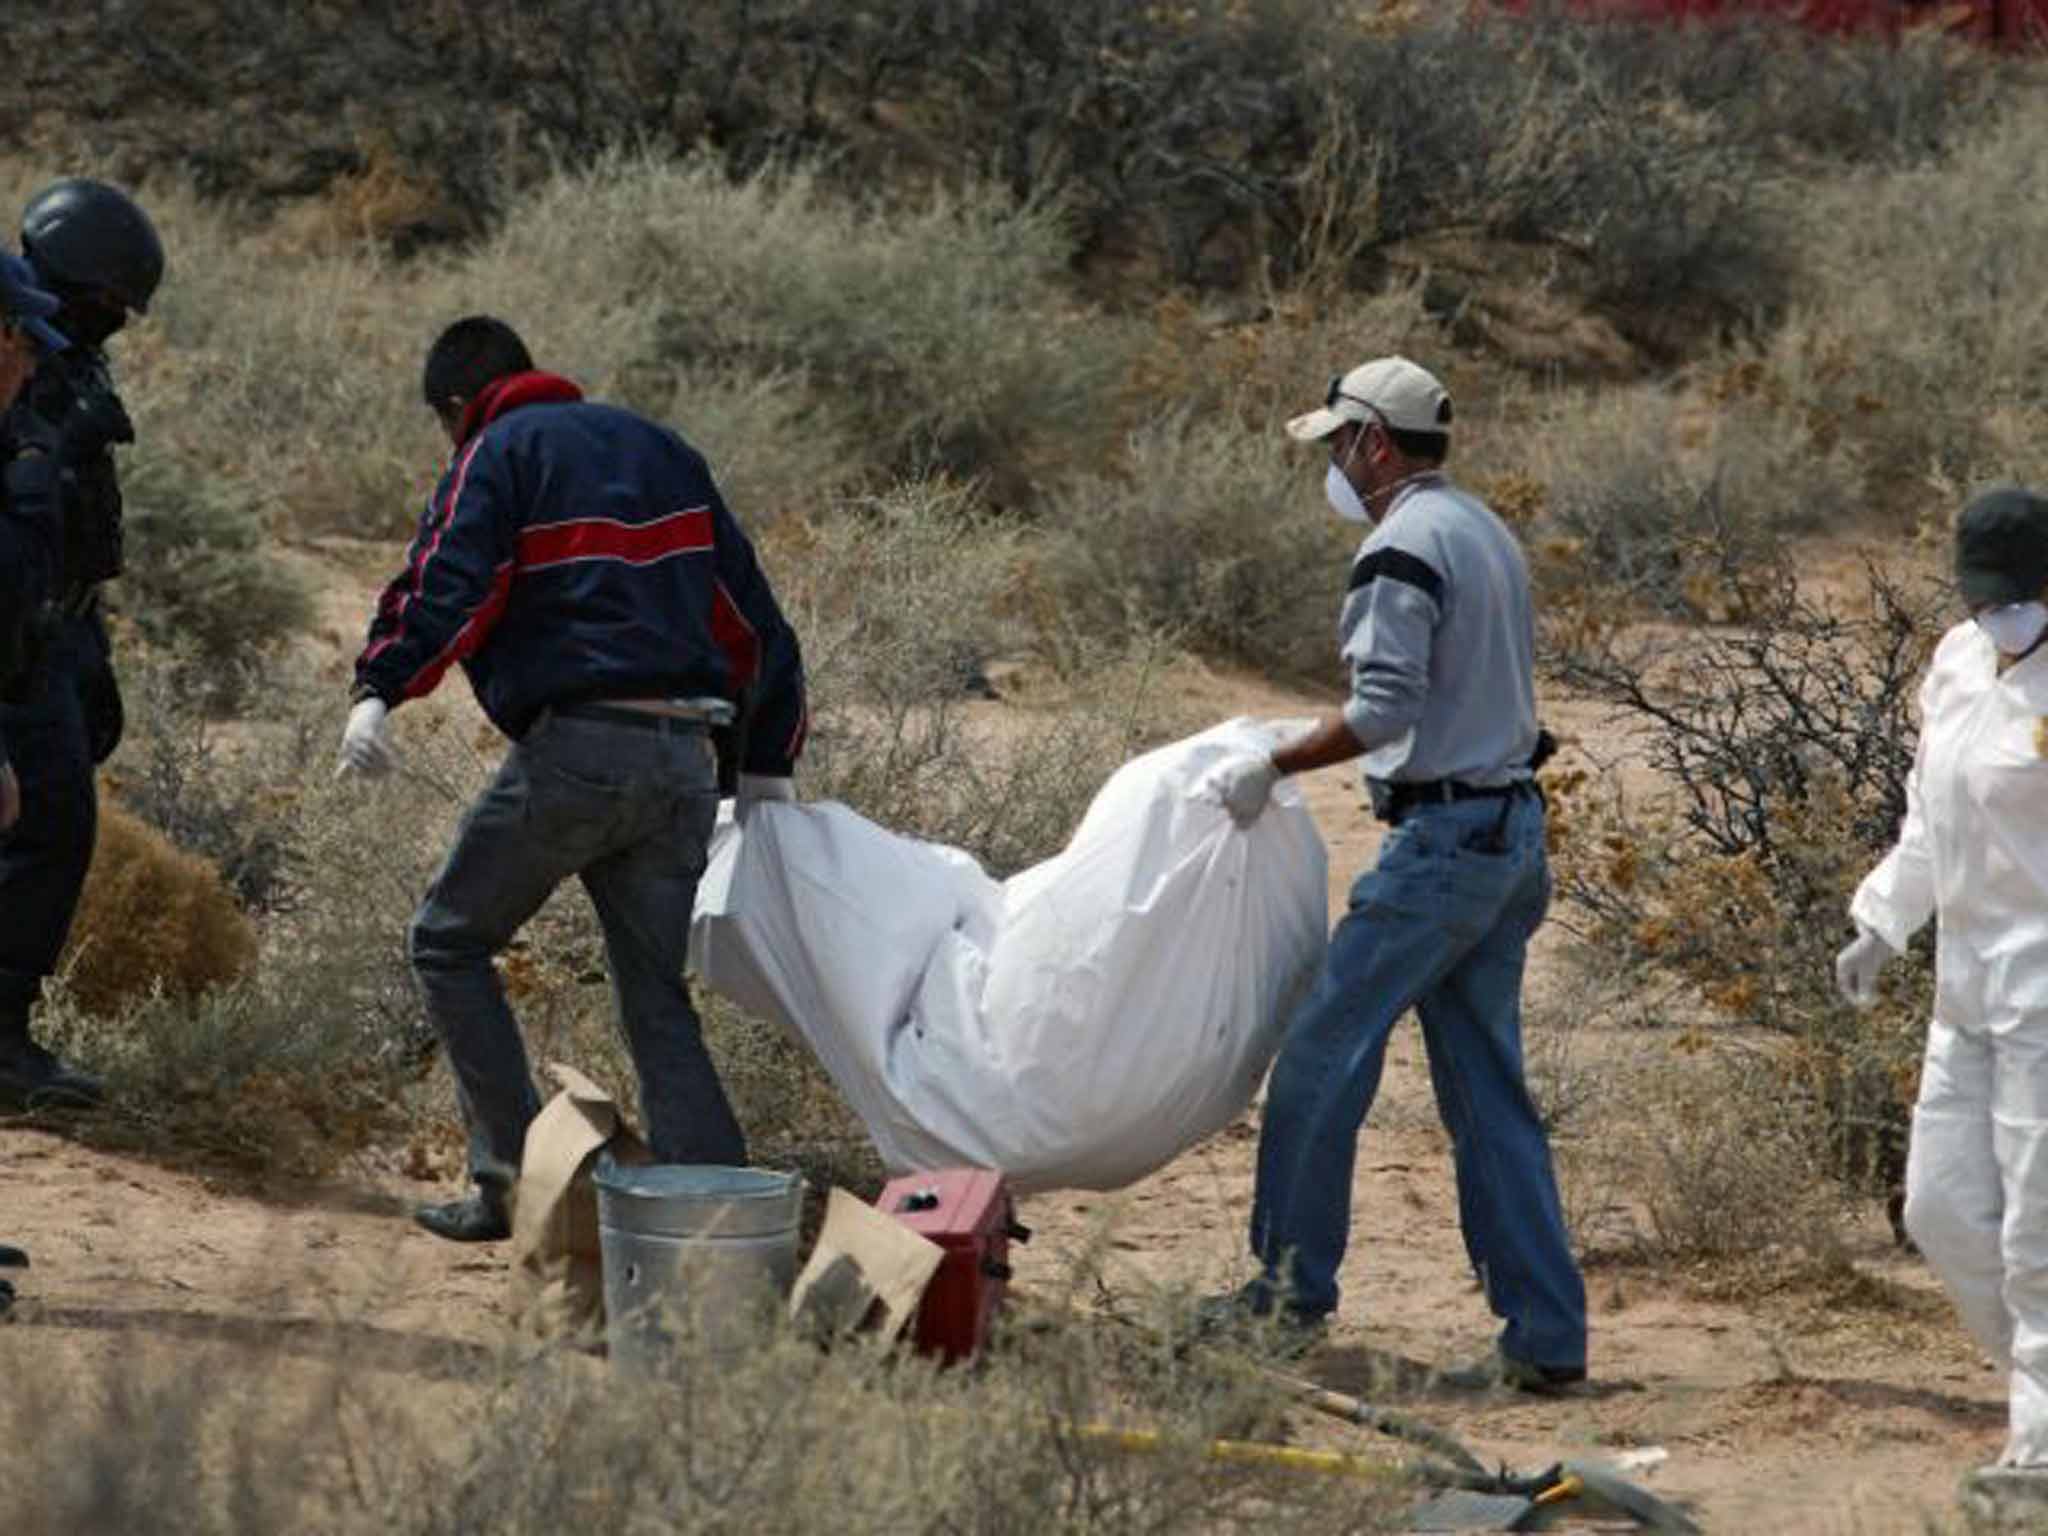 Crime scene: a corpse is removed from the Juarez mass grave